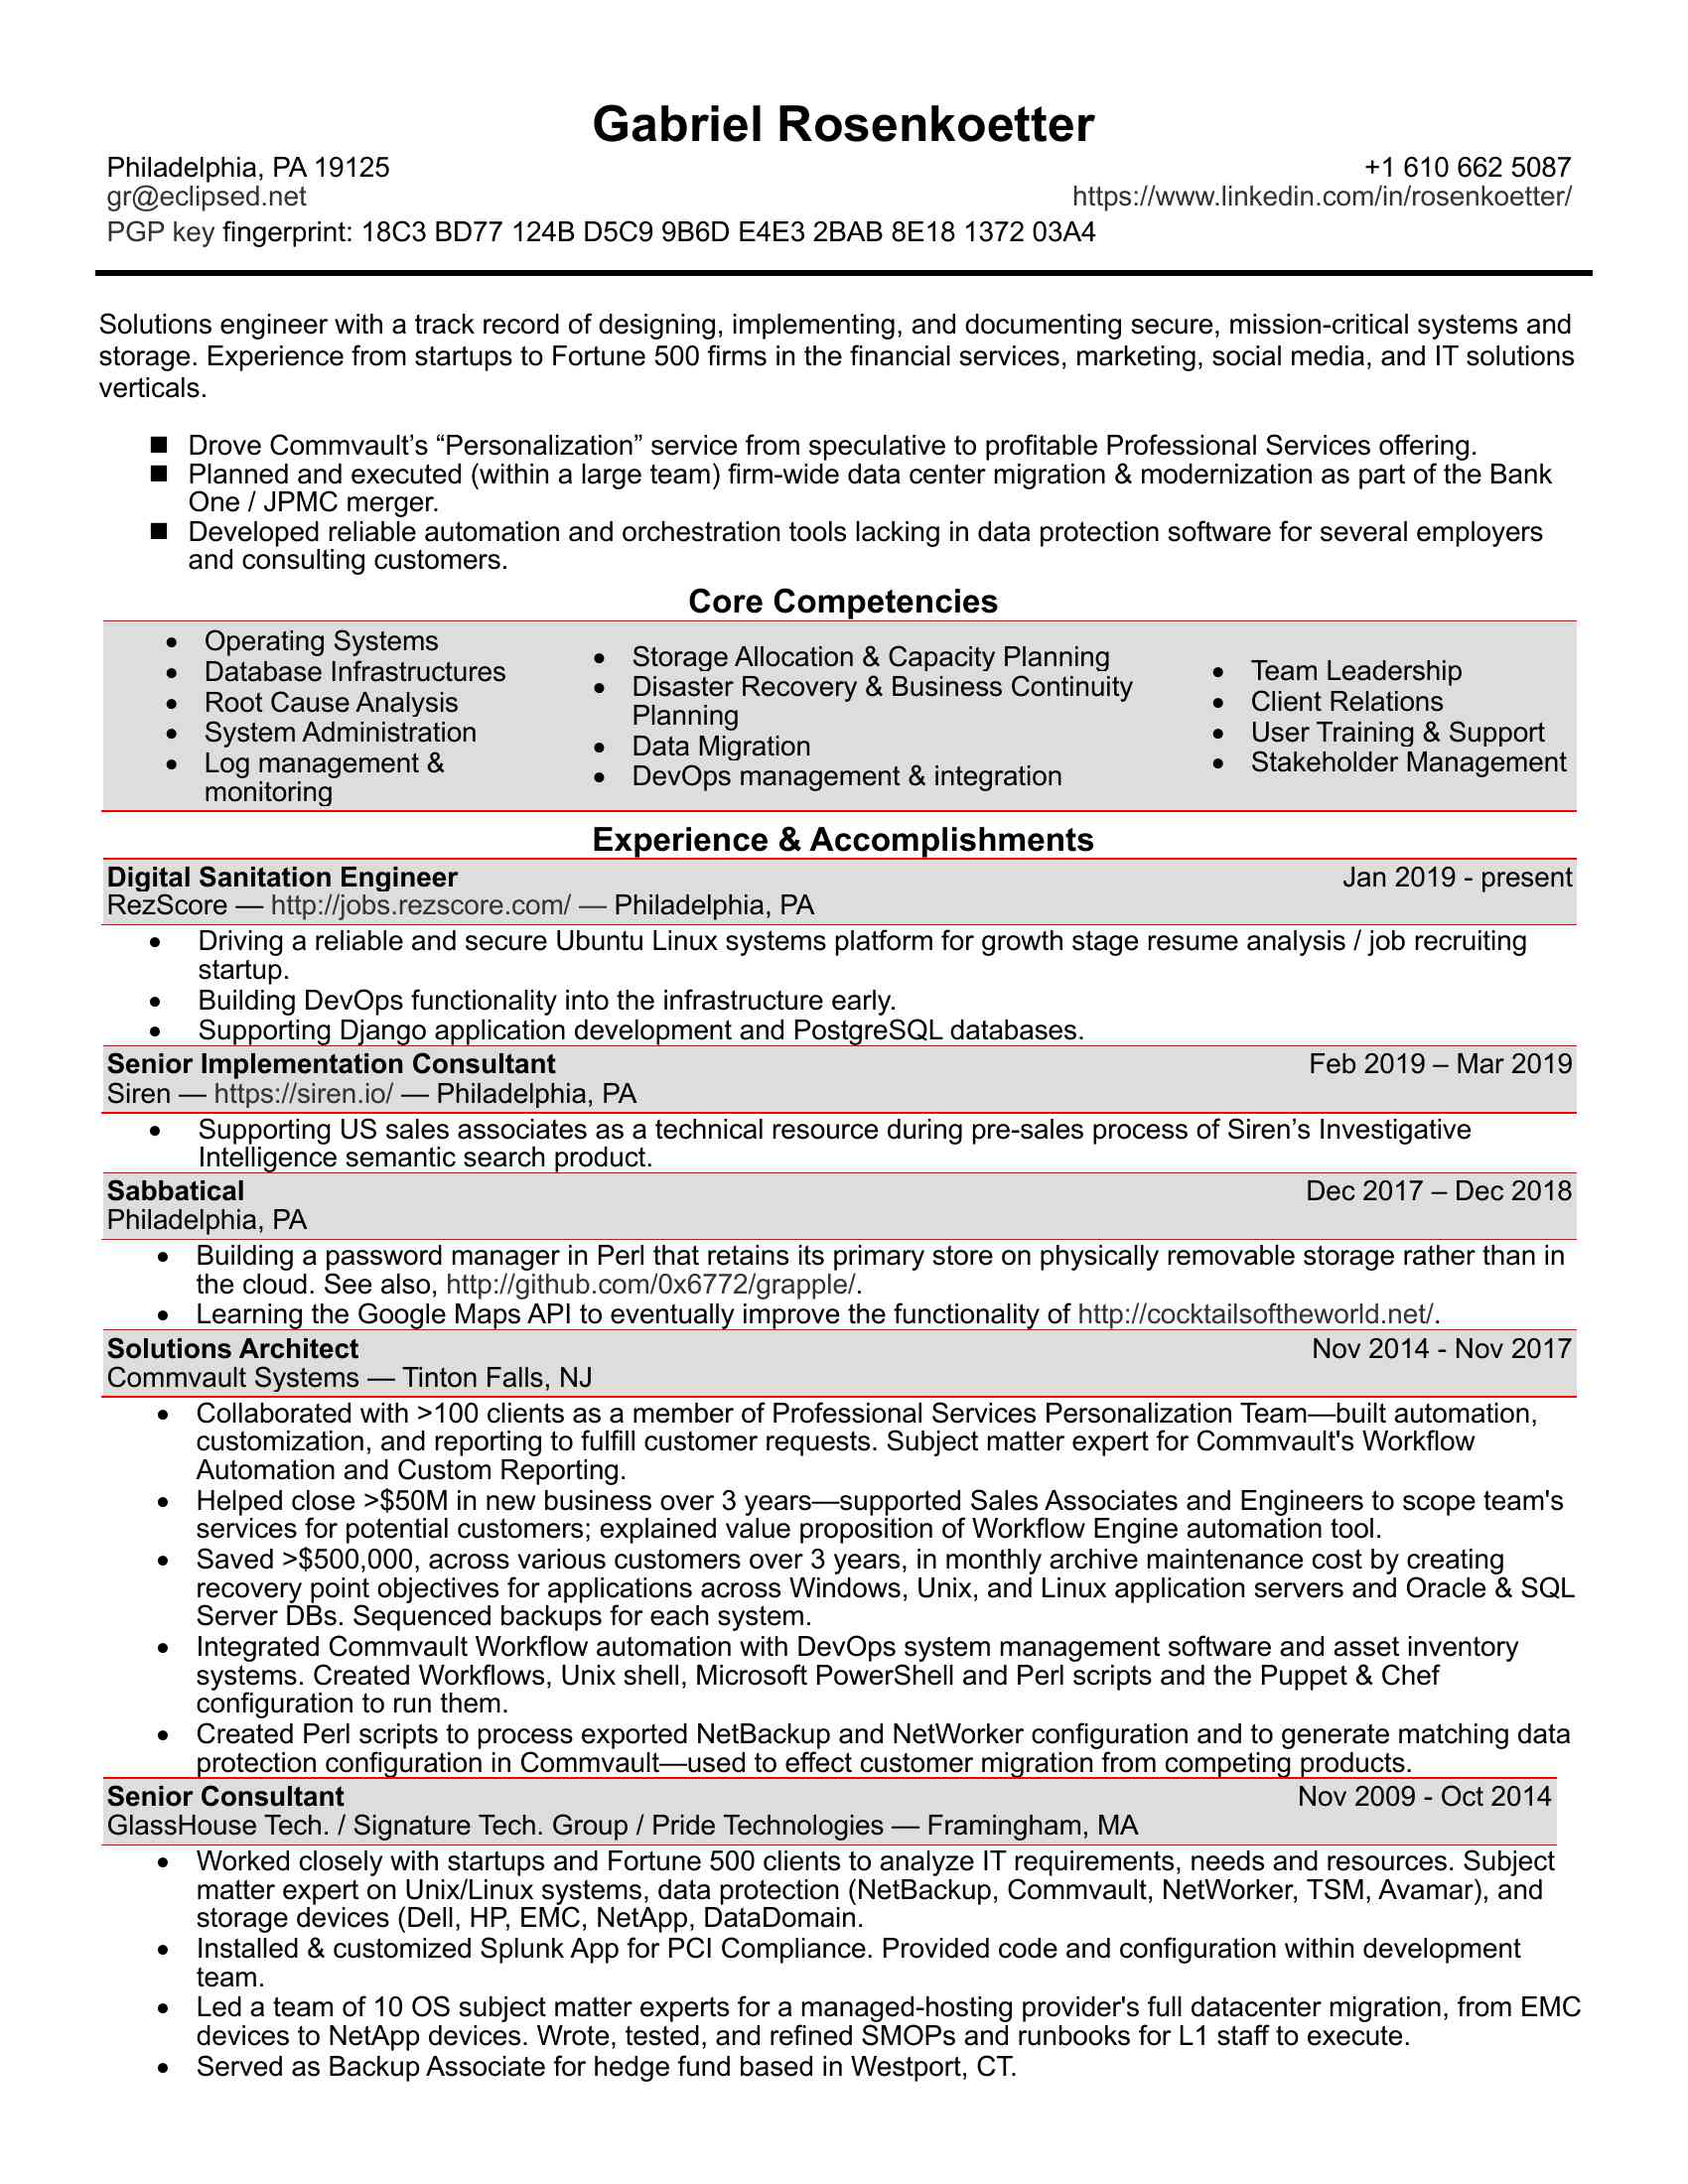 <BR>Microsoft Word - gr-resume-2019-03-28.docx<BR>Gabriel Rosenkoetter <BR>Philadelphia, PA 19125 <BR>+1 (XXX) XXX-XXXX <BR>XXXX@XXXX.XXX <BR>https://www.linkedin.com/in/rosenkoetter/ <BR>PGP key fingerprint: 18C3 BD77 124B D5C9 9B6D E4E3 2BAB 8E18 1372 03A4 Solutions engineer with a track record of designing, implementing, and documenting secure, mission-critical systems and <BR>storage. Experience from startups to Fortune 500 firms in the financial services, marketing, social media, and IT solutions <BR>verticals. n Drove Commvault’s “Personalization” service from speculative to profitable Professional Services offering. <BR>n Planned and executed (within a large team) firm-wide data center migration & modernization as part of the Bank <BR>One / JPMC merger. <BR>n Developed reliable automation and orchestration tools lacking in data protection software for several employers <BR>and consulting customers. <BR>Core Competencies <BR>• Operating Systems <BR>•<BR>•<BR> Database Infrastructures <BR> Storage Allocation & Capacity Planning <BR>• Team Leadership <BR>•<BR>•<BR> Root Cause Analysis <BR> Disaster Recovery & Business Continuity <BR>• Client Relations <BR>•<BR>Planning <BR> System Administration <BR>•<BR>• User Training & Support <BR>•<BR> Data Migration <BR> Log management & <BR>•<BR>• Stakeholder Management <BR>monitoring <BR> DevOps management & integration <BR>Experience & Accomplishments <BR>Digital Sanitation Engineer <BR>Jan 2019 - present <BR>RezScore — http://jobs.rezscore.com/ — Philadelphia, PA <BR>• Driving a reliable and secure Ubuntu Linux systems platform for growth stage resume analysis / job recruiting <BR>startup. <BR>• Building DevOps functionality into the infrastructure early. <BR>• Supporting Django application development and PostgreSQL databases. <BR>Senior Implementation Consultant <BR>Feb 2019 – Mar 2019 <BR>Siren — https://siren.io/ — Philadelphia, PA <BR>• Supporting US sales associates as a technical resource during pre-sales process of Siren’s Investigative <BR>Intel igence semantic search product. <BR>Sabbatical <BR>Dec 2017 – Dec 2018 <BR>Philadelphia, PA <BR>• Building a password manager in Perl that retains its primary store on physically removable storage rather than in <BR>the cloud. See also, http://github.com/0x6772/grapple/. <BR>• Learning the Google Maps API to eventually improve the functionality of http://cocktailsoftheworld.net/. <BR>Solutions Architect <BR>Nov 2014 - Nov 2017 <BR>Commvault Systems — Tinton Fal s, NJ <BR>• Col aborated with >100 clients as a member of Professional Services Personalization Team—built automation, <BR>customization, and reporting to fulfil customer requests. Subject matter expert for Commvault's Workflow <BR>Automation and Custom Reporting. <BR>• Helped close >$50M in new business over 3 years—supported Sales Associates and Engineers to scope team's <BR>services for potential customers; explained value proposition of Workflow Engine automation tool. <BR>• Saved >$500,000, across various customers over 3 years, in monthly archive maintenance cost by creating <BR>recovery point objectives for applications across Windows, Unix, and Linux application servers and Oracle & SQL <BR>Server DBs. Sequenced backups for each system. <BR>• Integrated Commvault Workflow automation with DevOps system management software and asset inventory <BR>systems. Created Workflows, Unix shell, Microsoft PowerShell and Perl scripts and the Puppet & Chef <BR>configuration to run them. <BR>• Created Perl scripts to process exported NetBackup and NetWorker configuration and to generate matching data <BR>protection configuration in Commvault—used to effect customer migration from competing products. <BR>Senior Consultant <BR>Nov 2009 - Oct 2014 <BR>GlassHouse Tech. / Signature Tech. Group / Pride Technologies — Framingham, MA <BR>• Worked closely with startups and Fortune 500 clients to analyze IT requirements, needs and resources. Subject <BR>matter expert on Unix/Linux systems, data protection (NetBackup, Commvault, NetWorker, TSM, Avamar), and <BR>storage devices (Dell, HP, EMC, NetApp, DataDomain. <BR>• Instal ed & customized Splunk App for PCI Compliance. Provided code and configuration within development <BR>team. <BR>• Led a team of XXXXXX matter experts for a managed-hosting provider's full datacenter migration, from EMC <BR>devices to NetApp devices. Wrote, tested, and refined SMOPs and runbooks for L1 staff to execute. <BR>• Served as Backup Associate for hedge fund based in Westport, CT. <BR>• Partnered with Unix, Linux, Windows, and VMware systems administrators, network administrators, and <BR>with application developers to protect firm's information assets at al layers. <BR>• Managed NetBackup & EMC Networker environments, providing data protection to physical and virtual <BR>Linux and Windows systems and to NetApp NAS storage. <BR>• Represented data protection for planning stage of a systems migration to a hybrid (public/private) cloud. <BR>• Administrated EMC DataDomain deduplicated storage and HP tape libraries. <BR>Systems / Storage / Backup consultant <BR>Jul 2007 to Jun 2010 <BR>Snooth Inc — New York, NY <BR>• Built and documented a bare-bones backup tool, relying only on rsync and SSH, to provide data protection, <BR>resiliency, and disaster recoverability for a growth-phase social media startup. <BR>• Provided periodic Debian and Red Hat Linux systems administration support and training for 5+ professionals, <BR>partnering with Snooth's PHP developers. <BR>Senior Systems Engineer <BR>Aug XXXXXX 2009 <BR>Radian Group — Philadelphia, PA <BR>• Spearheaded HP-UX, RedHat Linux, and VMware ESX systems administration and NetBackup data protection for <BR>national mortgage insurance firm. Reported to Unix Team Lead and Director of Storage & Datacenter. <BR>• Provided support for EMC Symmetrix, DMX, Clari on, and Celerra disk storage. <BR>• Implemented tape hardware encryption, using Decru DataFort inline fibre channel devices. Later, migrated <BR>StorageTek tape libraries to LTO-4 tape drives with embedded hardware encryption. <BR>• Authored standards and practices to ensure recoverability throughout the DataFort-encrypted media's lifecycle. <BR>• Automated NetBackup's Vault reporting and Iron Mountain SecureSync Tape Management web application <BR>interface with tools built in Perl. <BR>Open Systems Engineer <BR>Aug 2004 to Jul 2006 <BR>Bank One / JP Morgan Chase — Columbus, OH / Wilmington, DE <BR>• Accountable for NetBackup environments at 10+ remote data center locations, providing tier 2 remediation of <BR>backup failures, and partnering with application owners to onboard their Unix, Linux, and Windows systems, <BR>Oracle, MySQL, PostgreSQL, and Microsoft SQL Server database systems, and custom-built applications. <BR>• Administrated Solaris, HP-UX, AIX, Red Hat Linux, and Windows systems for NetBackup server environment. <BR>• Engaged in 24/7 on-call rotation to provide tier 2 out-of-hours support for backup or system failures. <BR>• Built Perl automation to manage StorageTek tape libraries and DataDomain deduplicated storage devices. <BR>• Promoted to engineering team, providing tier 3 support across al backup environments. Built systems automation <BR>and backup job sequencing tools in Unix shel and Perl, and integrated into CA AutoSys. <BR>• Upon merger between Bank One and JPMC, planned and executed data center modernization, migration, and <BR>consolidation project, moving from 20+ local data centers across the US to 3 regional data centers. <BR>Unix & Linux System Administrator <BR>Jan 2002 to Jun 2004 <BR>Transcontinental CCXXXXXX — Ivyland, PA <BR>• Administrated 10+ Solaris and 50+ Red Hat Linux systems for national y recognized direct mail marketing firm. <BR>• Automated systems administration and SAN fabric management processes, monitored system and RDBMS in <BR>Nagios. Integrated Unix/Linux systems with Active Directory through OpenLDAP for user authentication. <BR>• Led a project to replace ad hoc system backups with Veritas NetBackup. Put disaster recovery process in place <BR>where none had previously existed. Participated in on-premise data center modernization project. <BR>Education <BR>Bachelor of Arts, Computer Science — Swarthmore Col ege, 2004 <BR>Technical Proficiencies <BR>Platforms <BR>Unix (Solaris, AIX, HP-UX, BSD), Linux (Red Hat, Debian, SUSE), macOS, Microsoft <BR>Windows <BR>Storage management <BR>EMC storage arrays & management software, NetApp, DataDomain <BR>Data protection software <BR>Veritas NetBackup & BackupExec, Commvault, EMC/Legato NetWorker, Tivoli Storage <BR>Manager (TSM) <BR>Log management software syslog, rsyslog, Splunk <BR>DevOps system <BR>Puppet, Chef <BR>management <BR>Programming languages <BR>C, C++, Perl, Python, PHP, sh, sed, awk, Java <BR>Firewal s & security <BR>BSD IP Filter, Linux IP Chains and IP Tables, SSH (SCP & SFTP), IPSec, Apache's <BR>mod_ssl, PGP & GnuPG/GPG <BR>DNS management <BR>BIND, djbdns <BR>SMTP/email systems <BR>Sendmail, Postfix, qmail, procmail, SpamAssassin, MailMan <BR>Web serving <BR>Apache httpd <BR>Network file sharing <BR>NFS, Samba (SMB/CIFS), automount/autofs, rsync, FTP, SCP, SFTP <BR>Authentication <BR>NIS, LDAP (OpenLDAP, Perl's Net::LDAP) <BR>Database environments <BR>Oracle, PostgreSQL, MySQL, Microsoft SQL Server <BR>